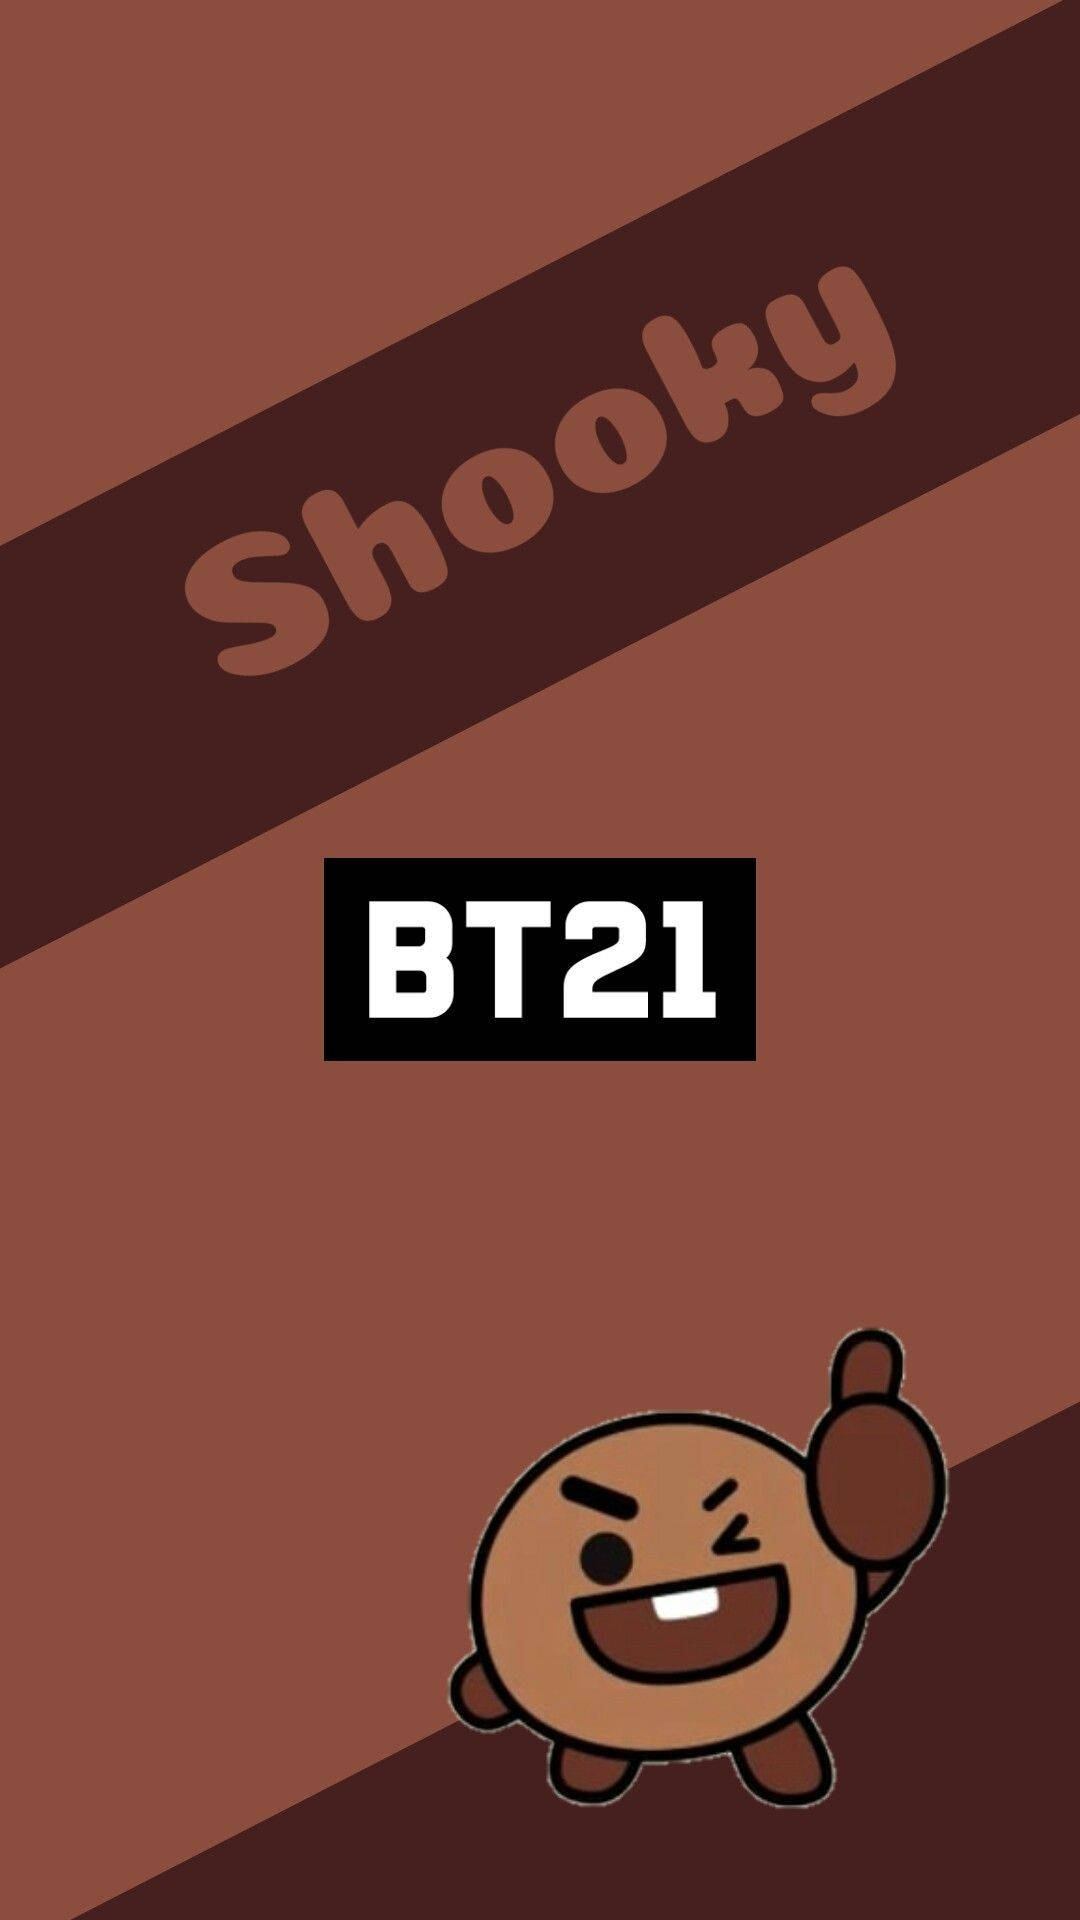 Shooky Bt21 Thumbs Up Poster Background